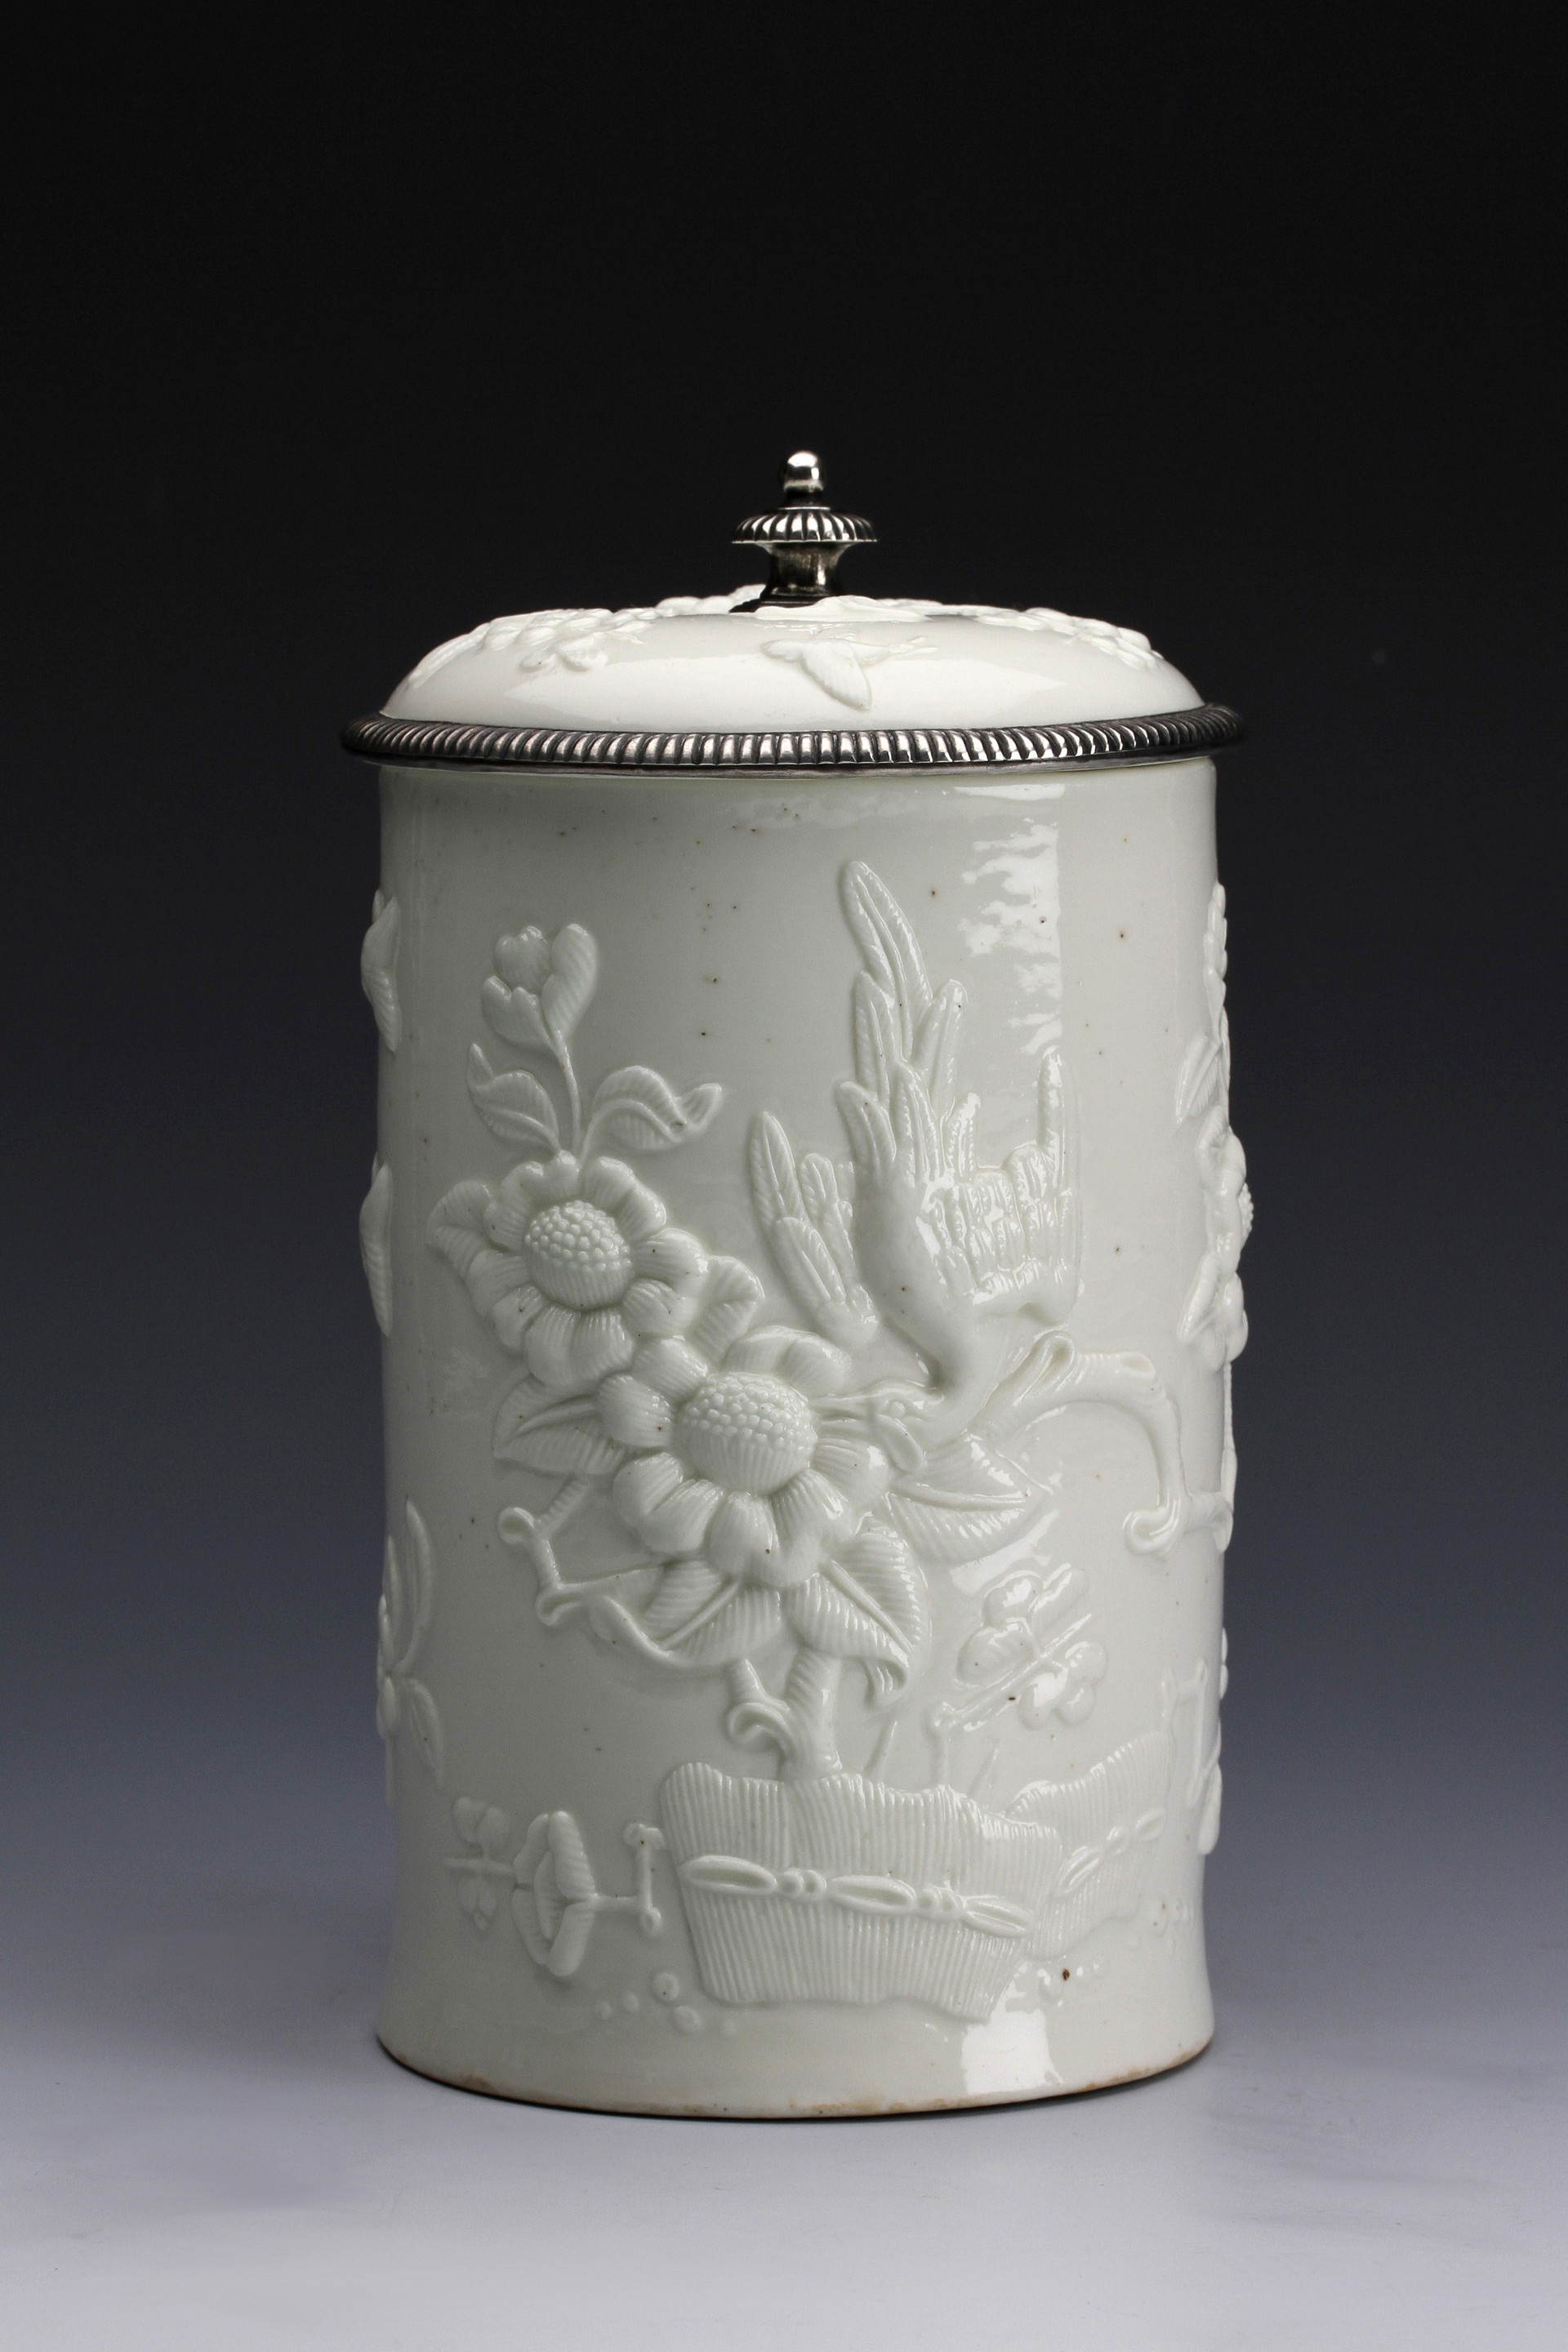 SAINT CLOUD SILVER-MOUNTED TOBACCO JAR AND DOMED COVER